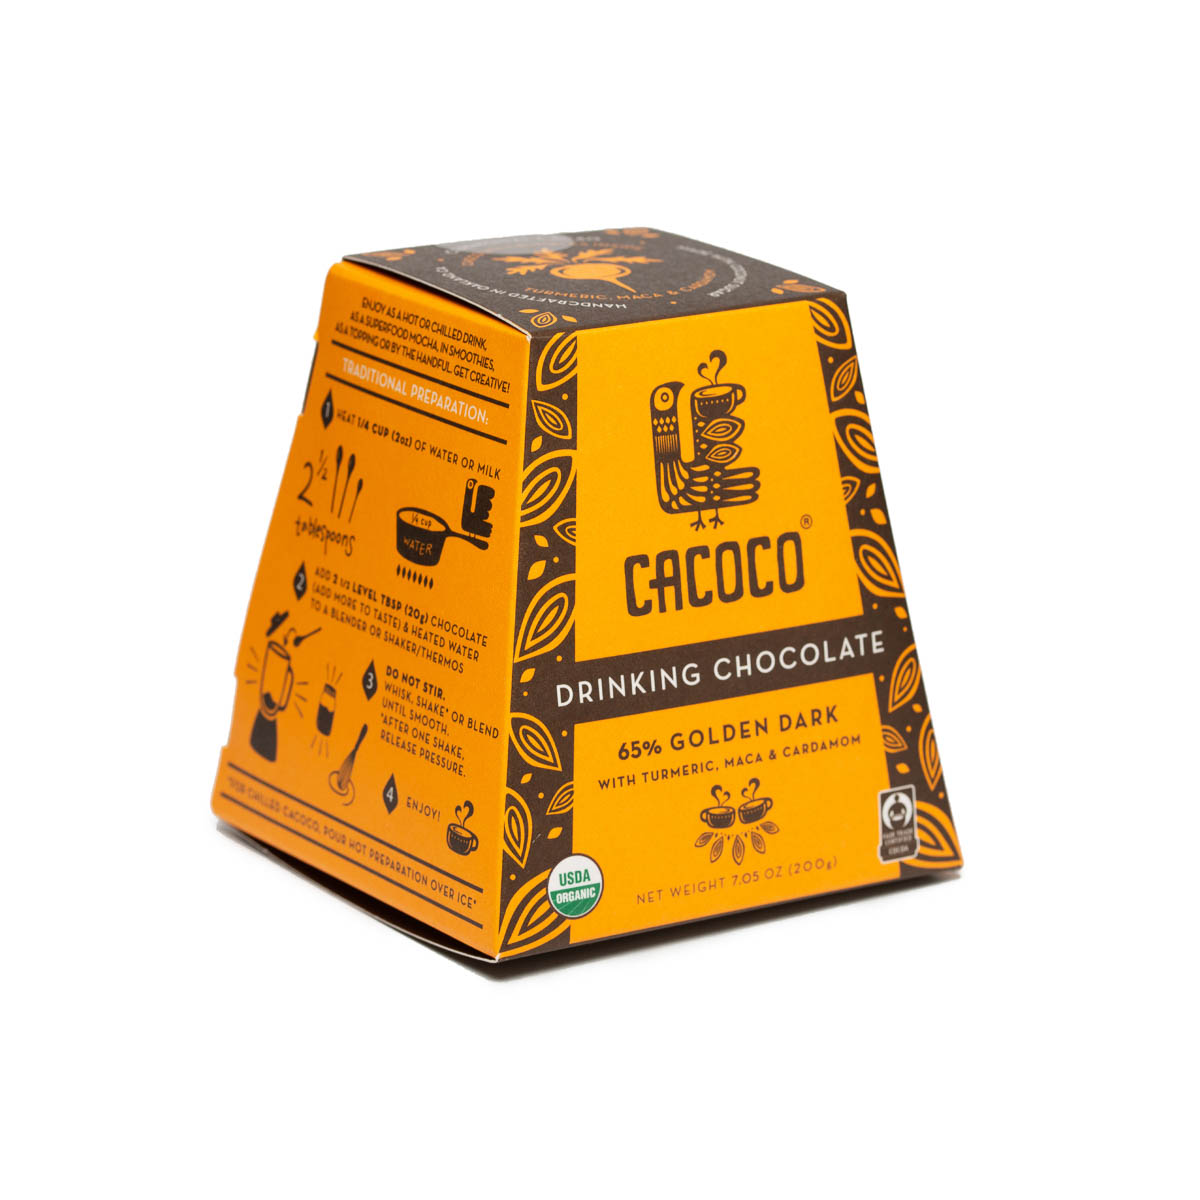 Golden Drinking Chocolate (7oz) | Coracao | Raw Living UK | Coracao 65% Golden Dark Drinking Chocolate is a Spiced Chocolate Blend, with Anti-Inflammatory Herbs, Warming Spices, and notes of Masala Chai.